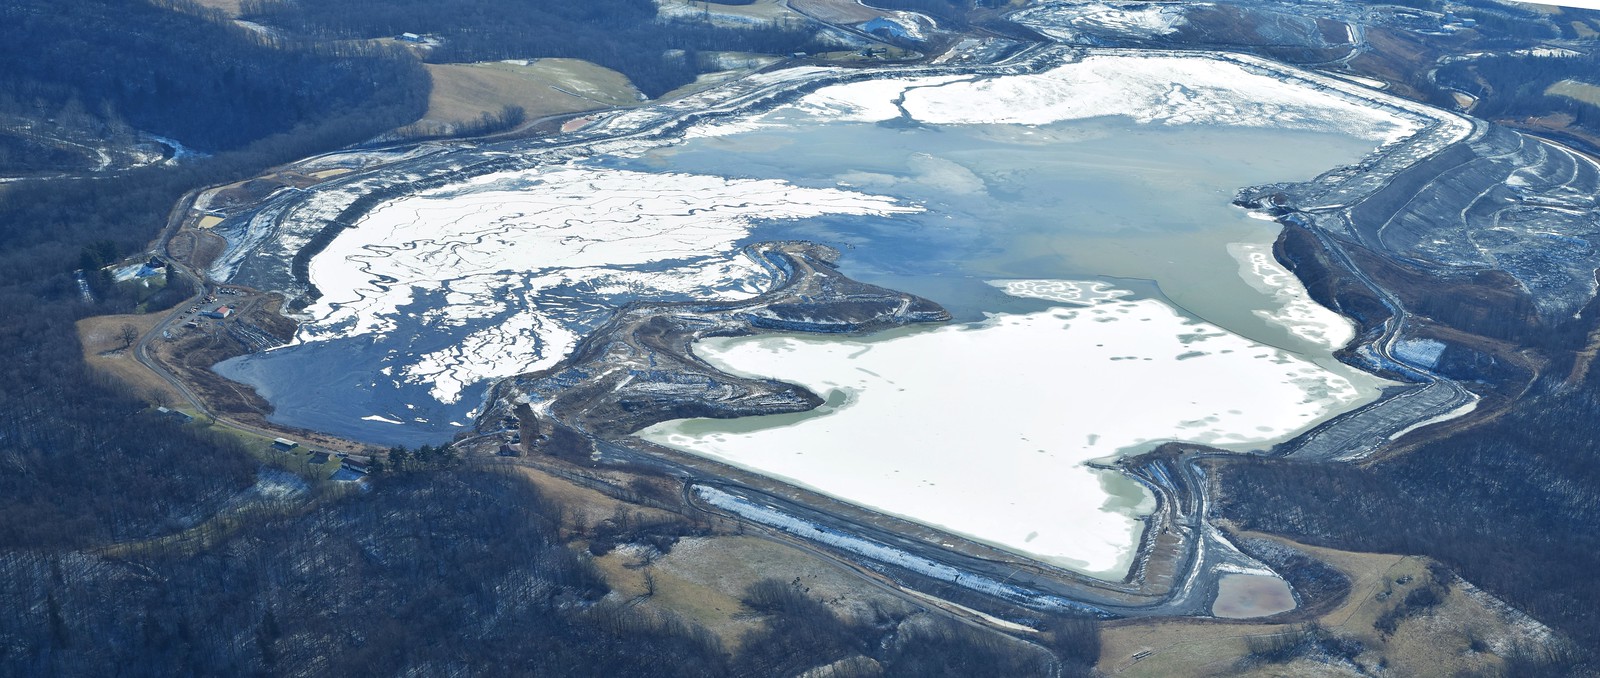 Aerial photograph of a coal slurry pond in Alledonia, Ohio. The photo shows a large, irregularly shaped pond in a forested landscape. Large snow patches cover the surface of the pond in places.